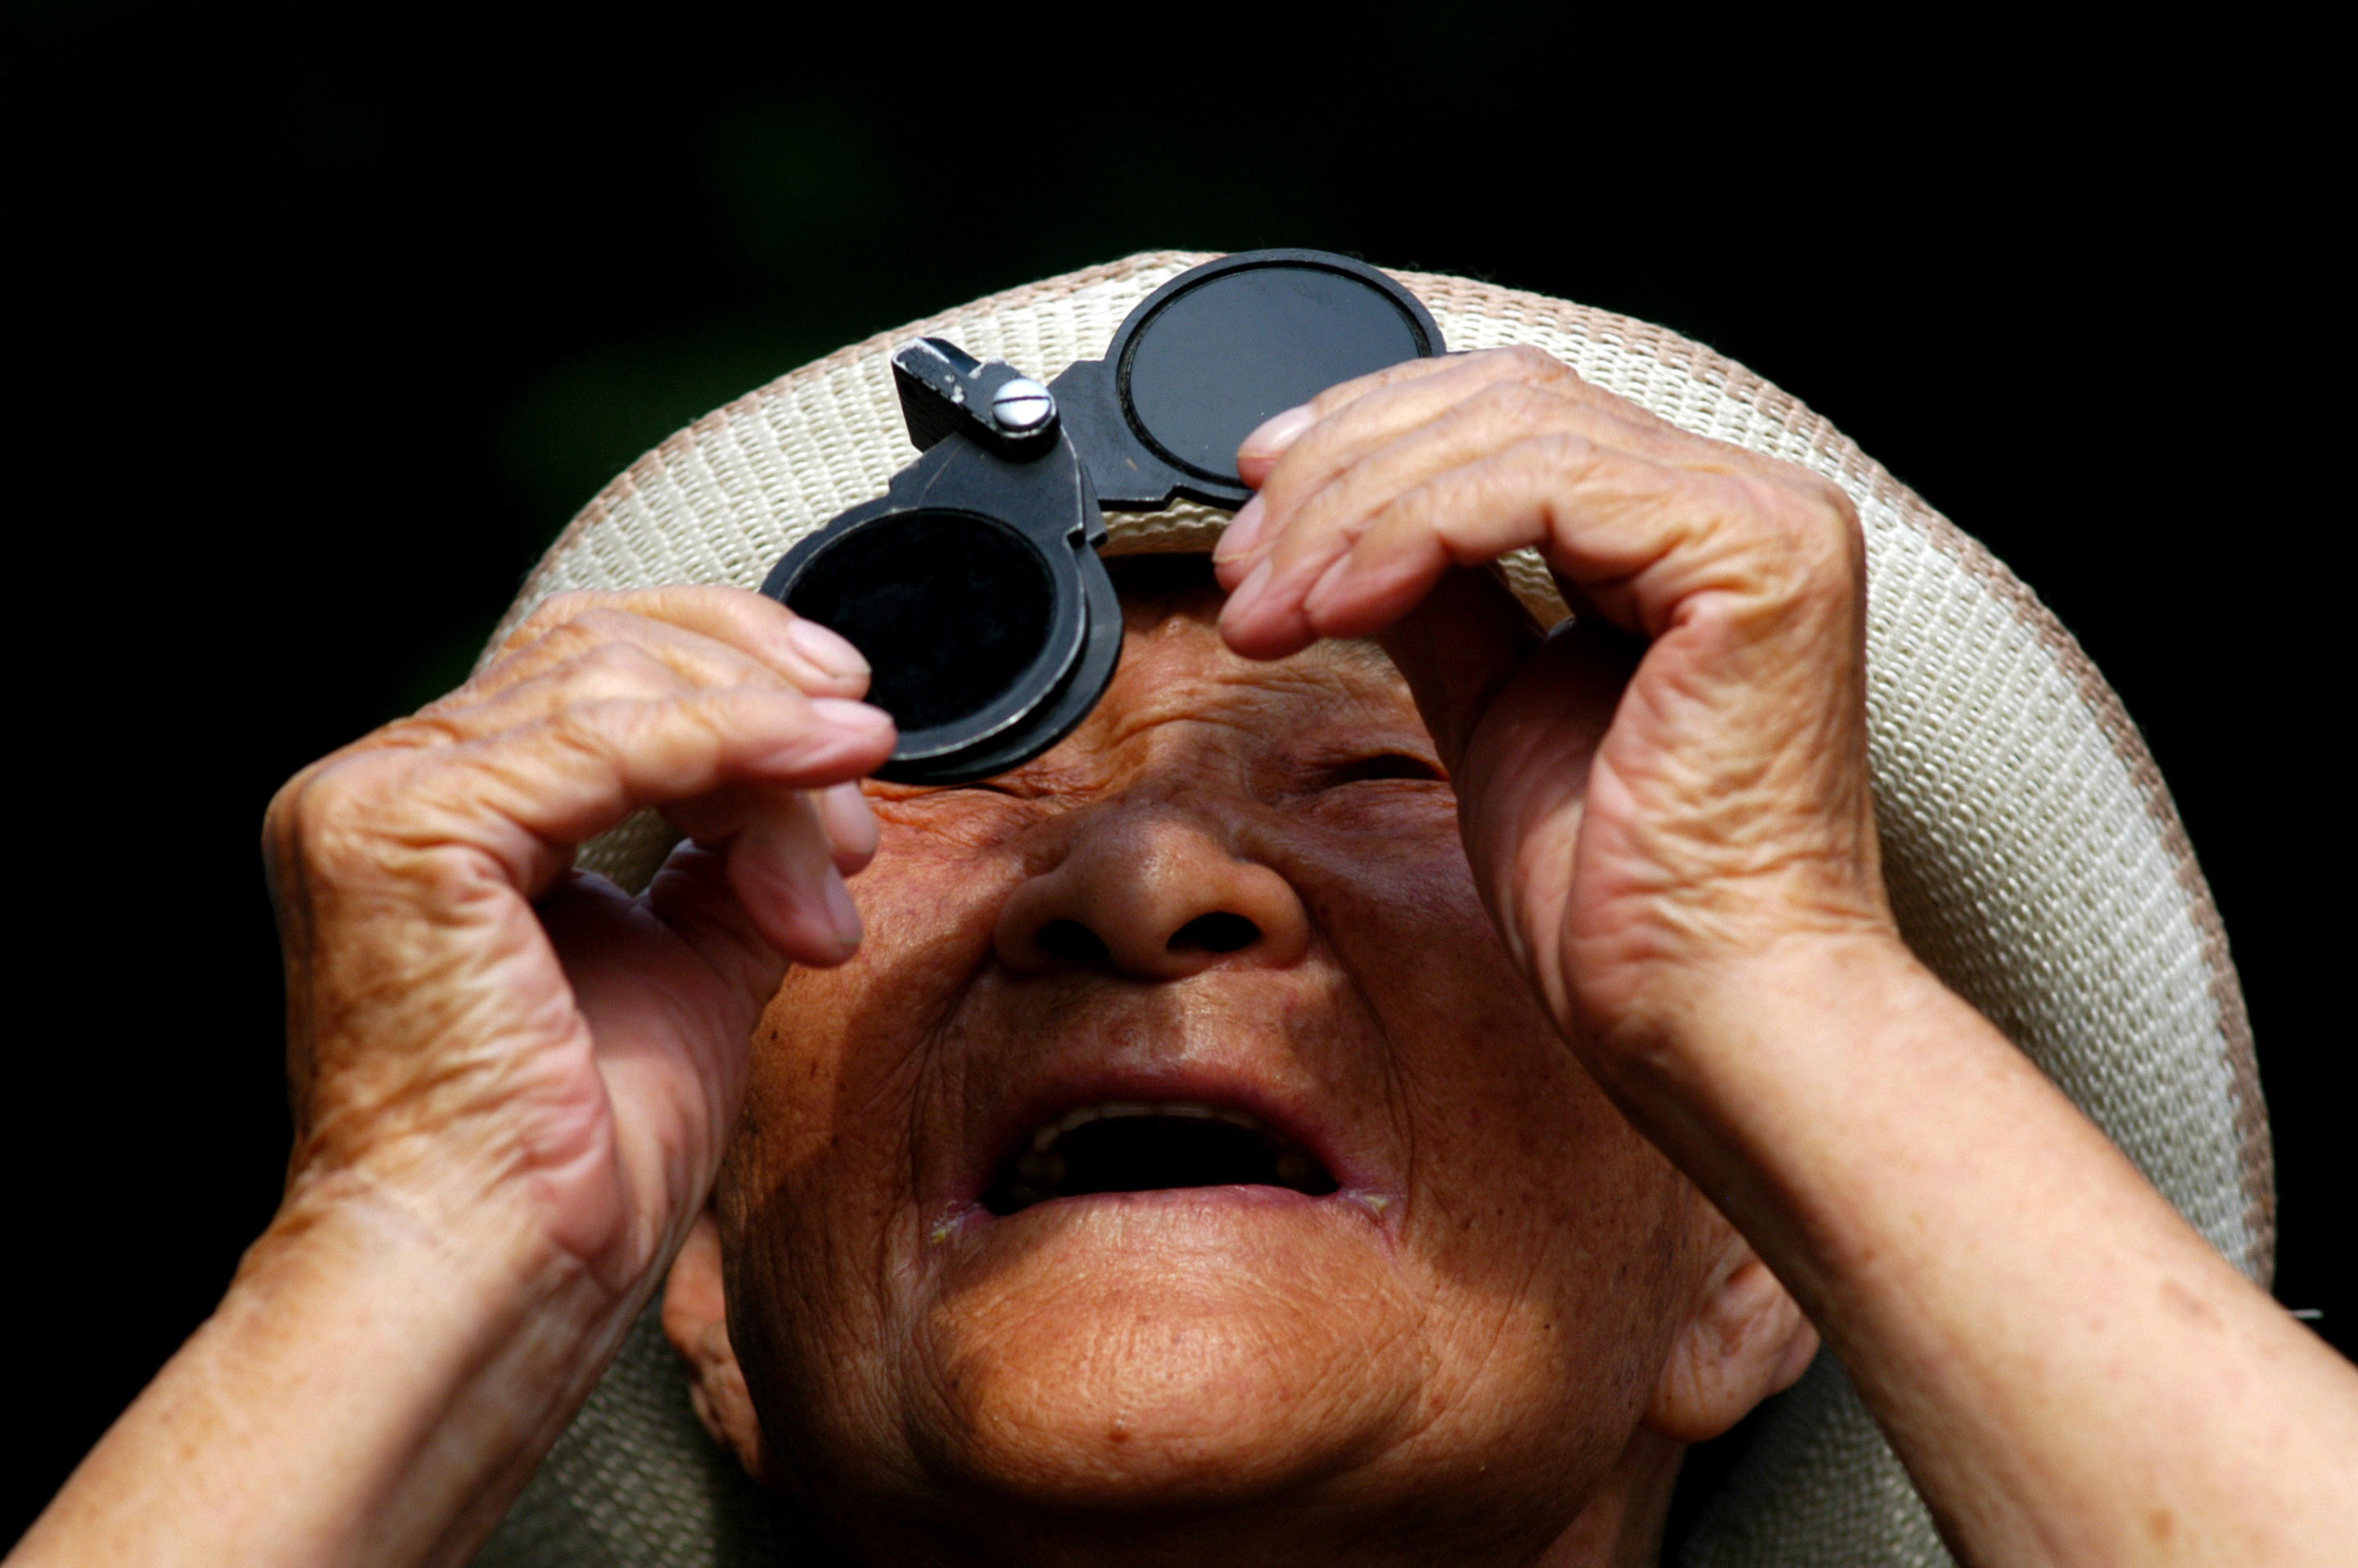 2009: A man observes the solar eclipse in Shenyang, China.